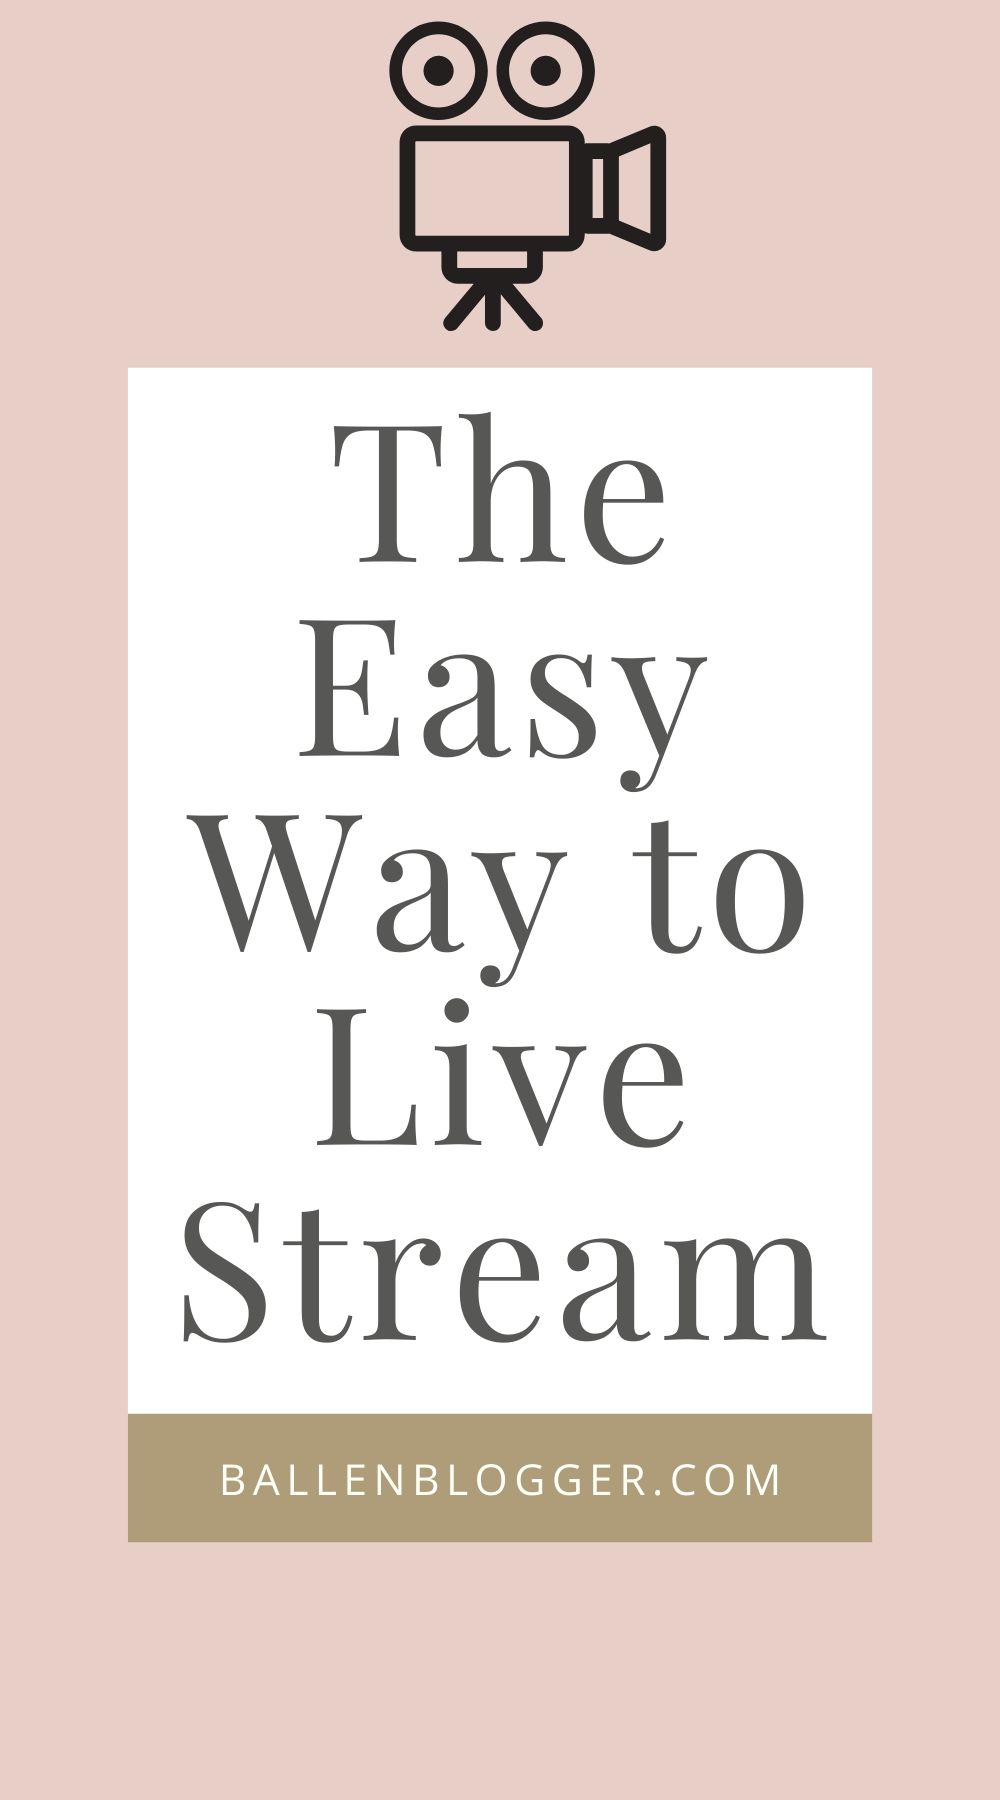 Be.Live is a streaming software for Facebook and Youtube. You can stream live on camera, interview a guest, and share your screen. Be.Live helps create highly-interactive live streams. 